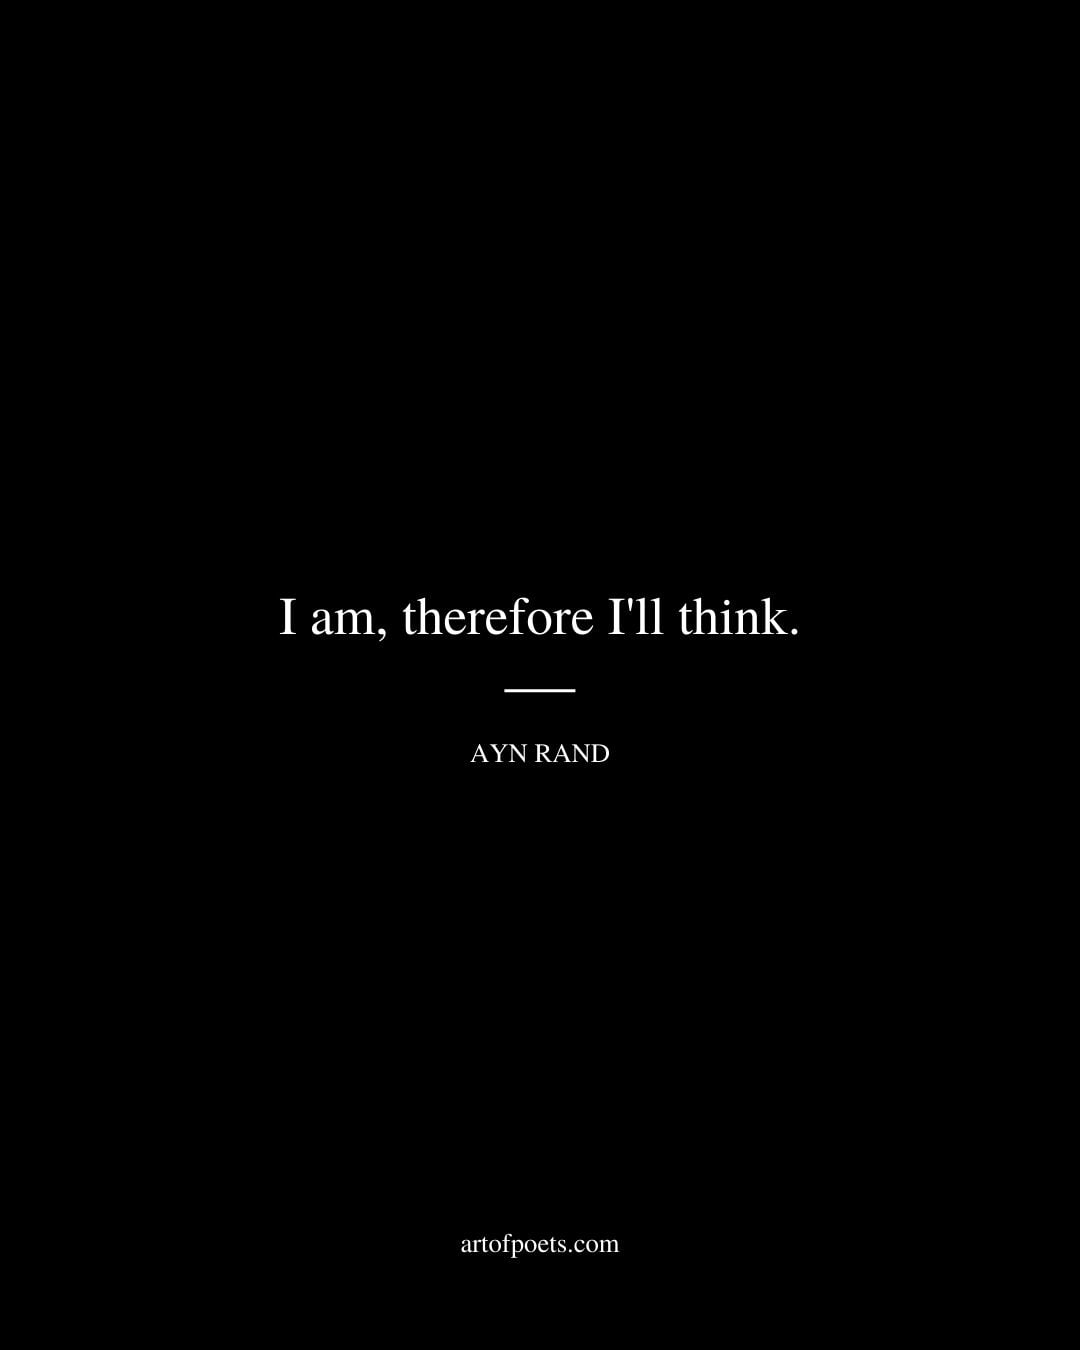 I am therefore Ill think